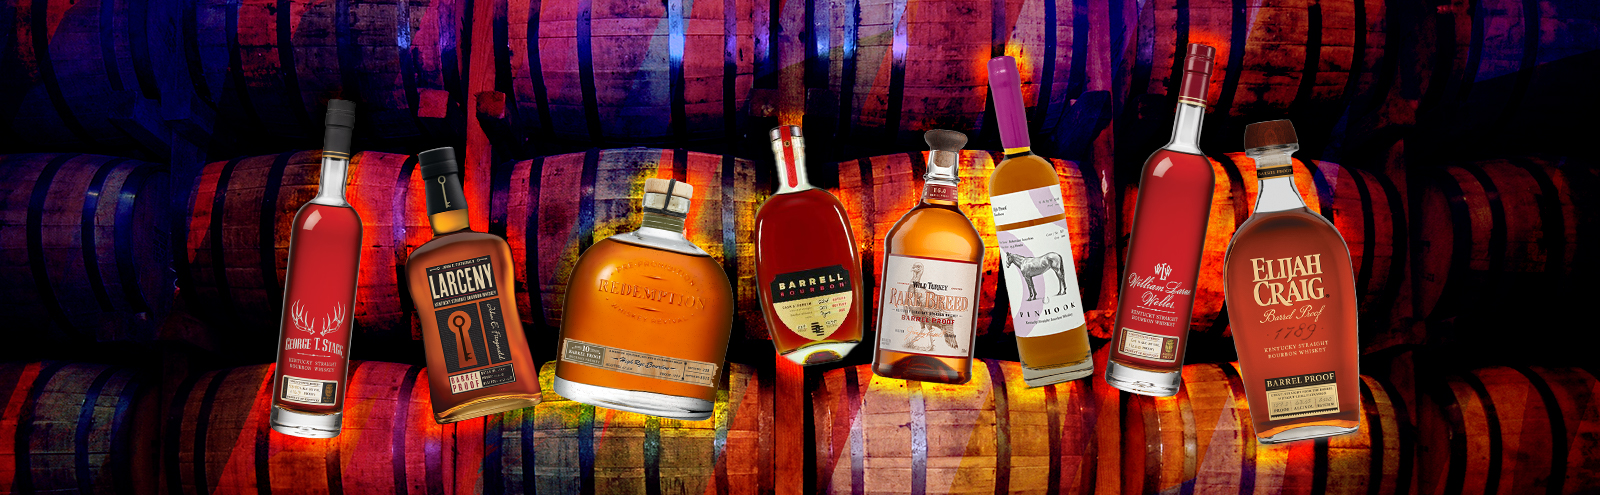 The Best Non-Alcoholic Whiskey, According to Our Blind Taste Test